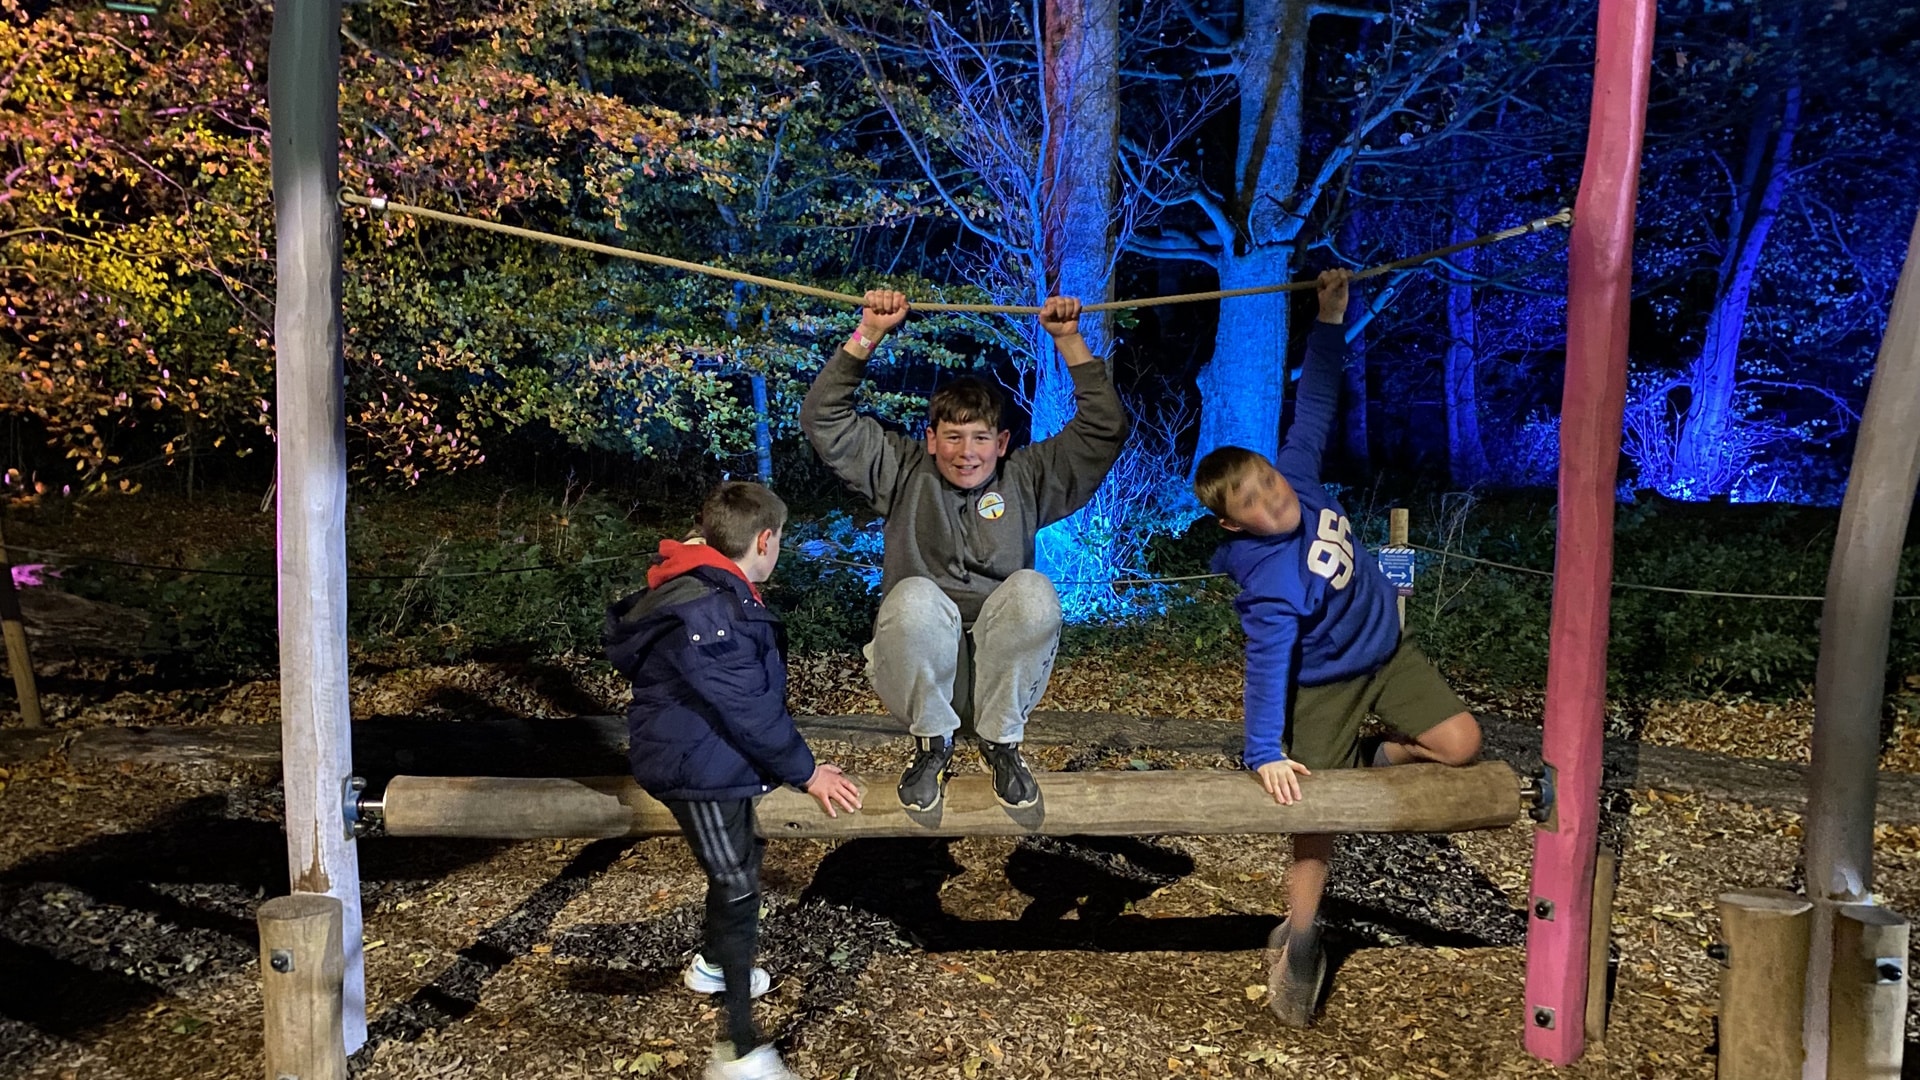 Stockeld Park - Adventure Playground in the Enchanted Forest